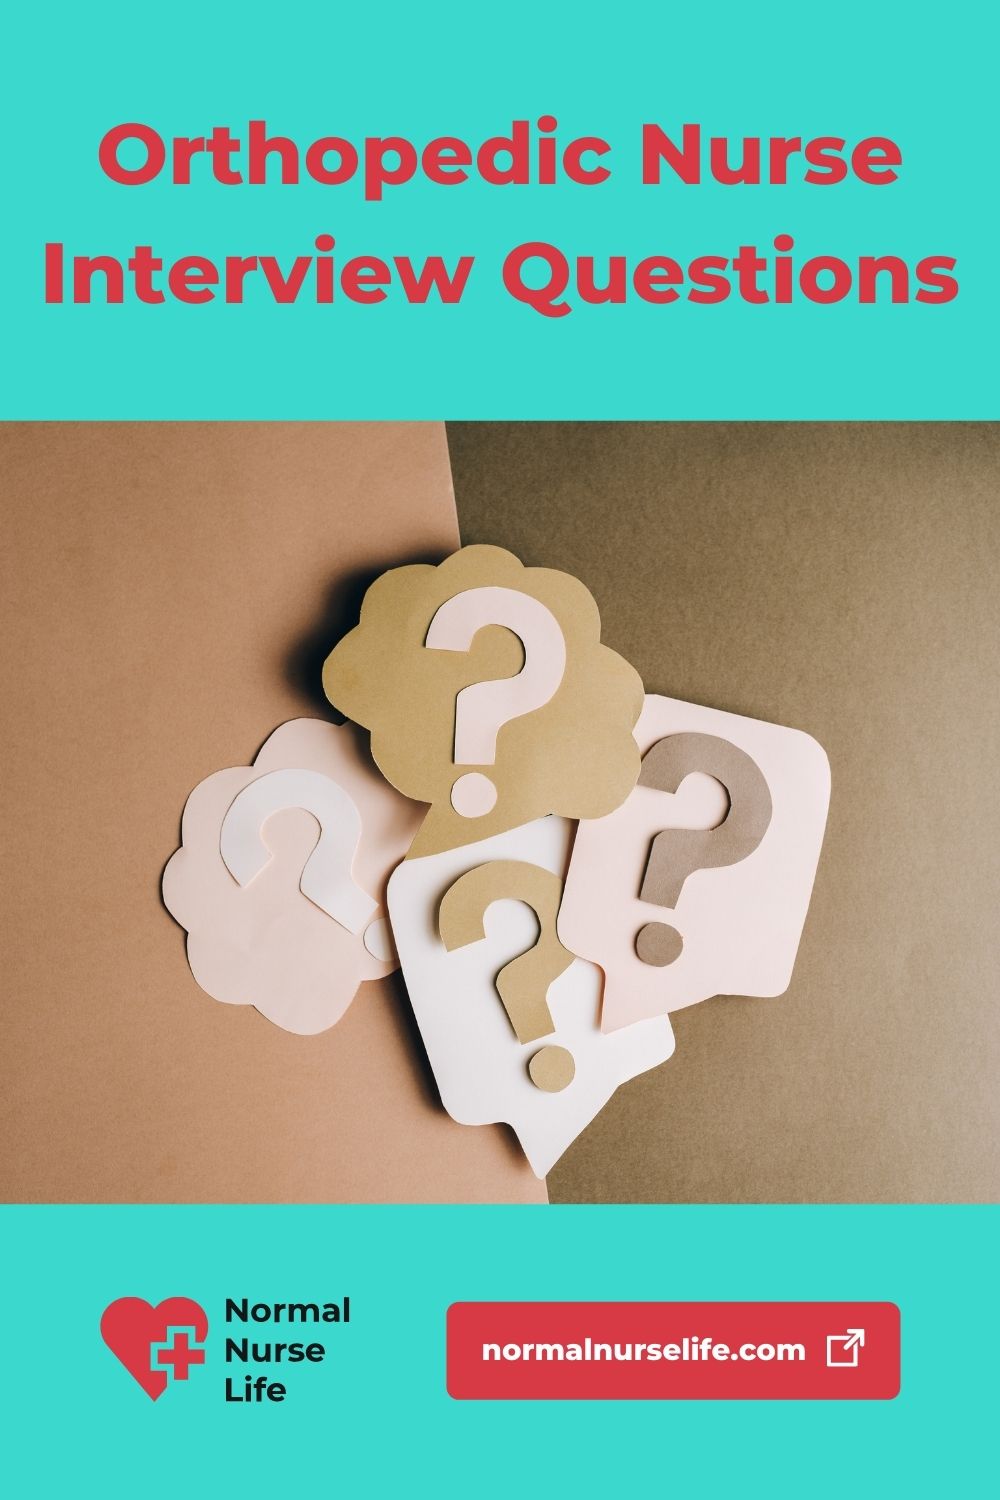 Orthopedic nurse interview questions and answers